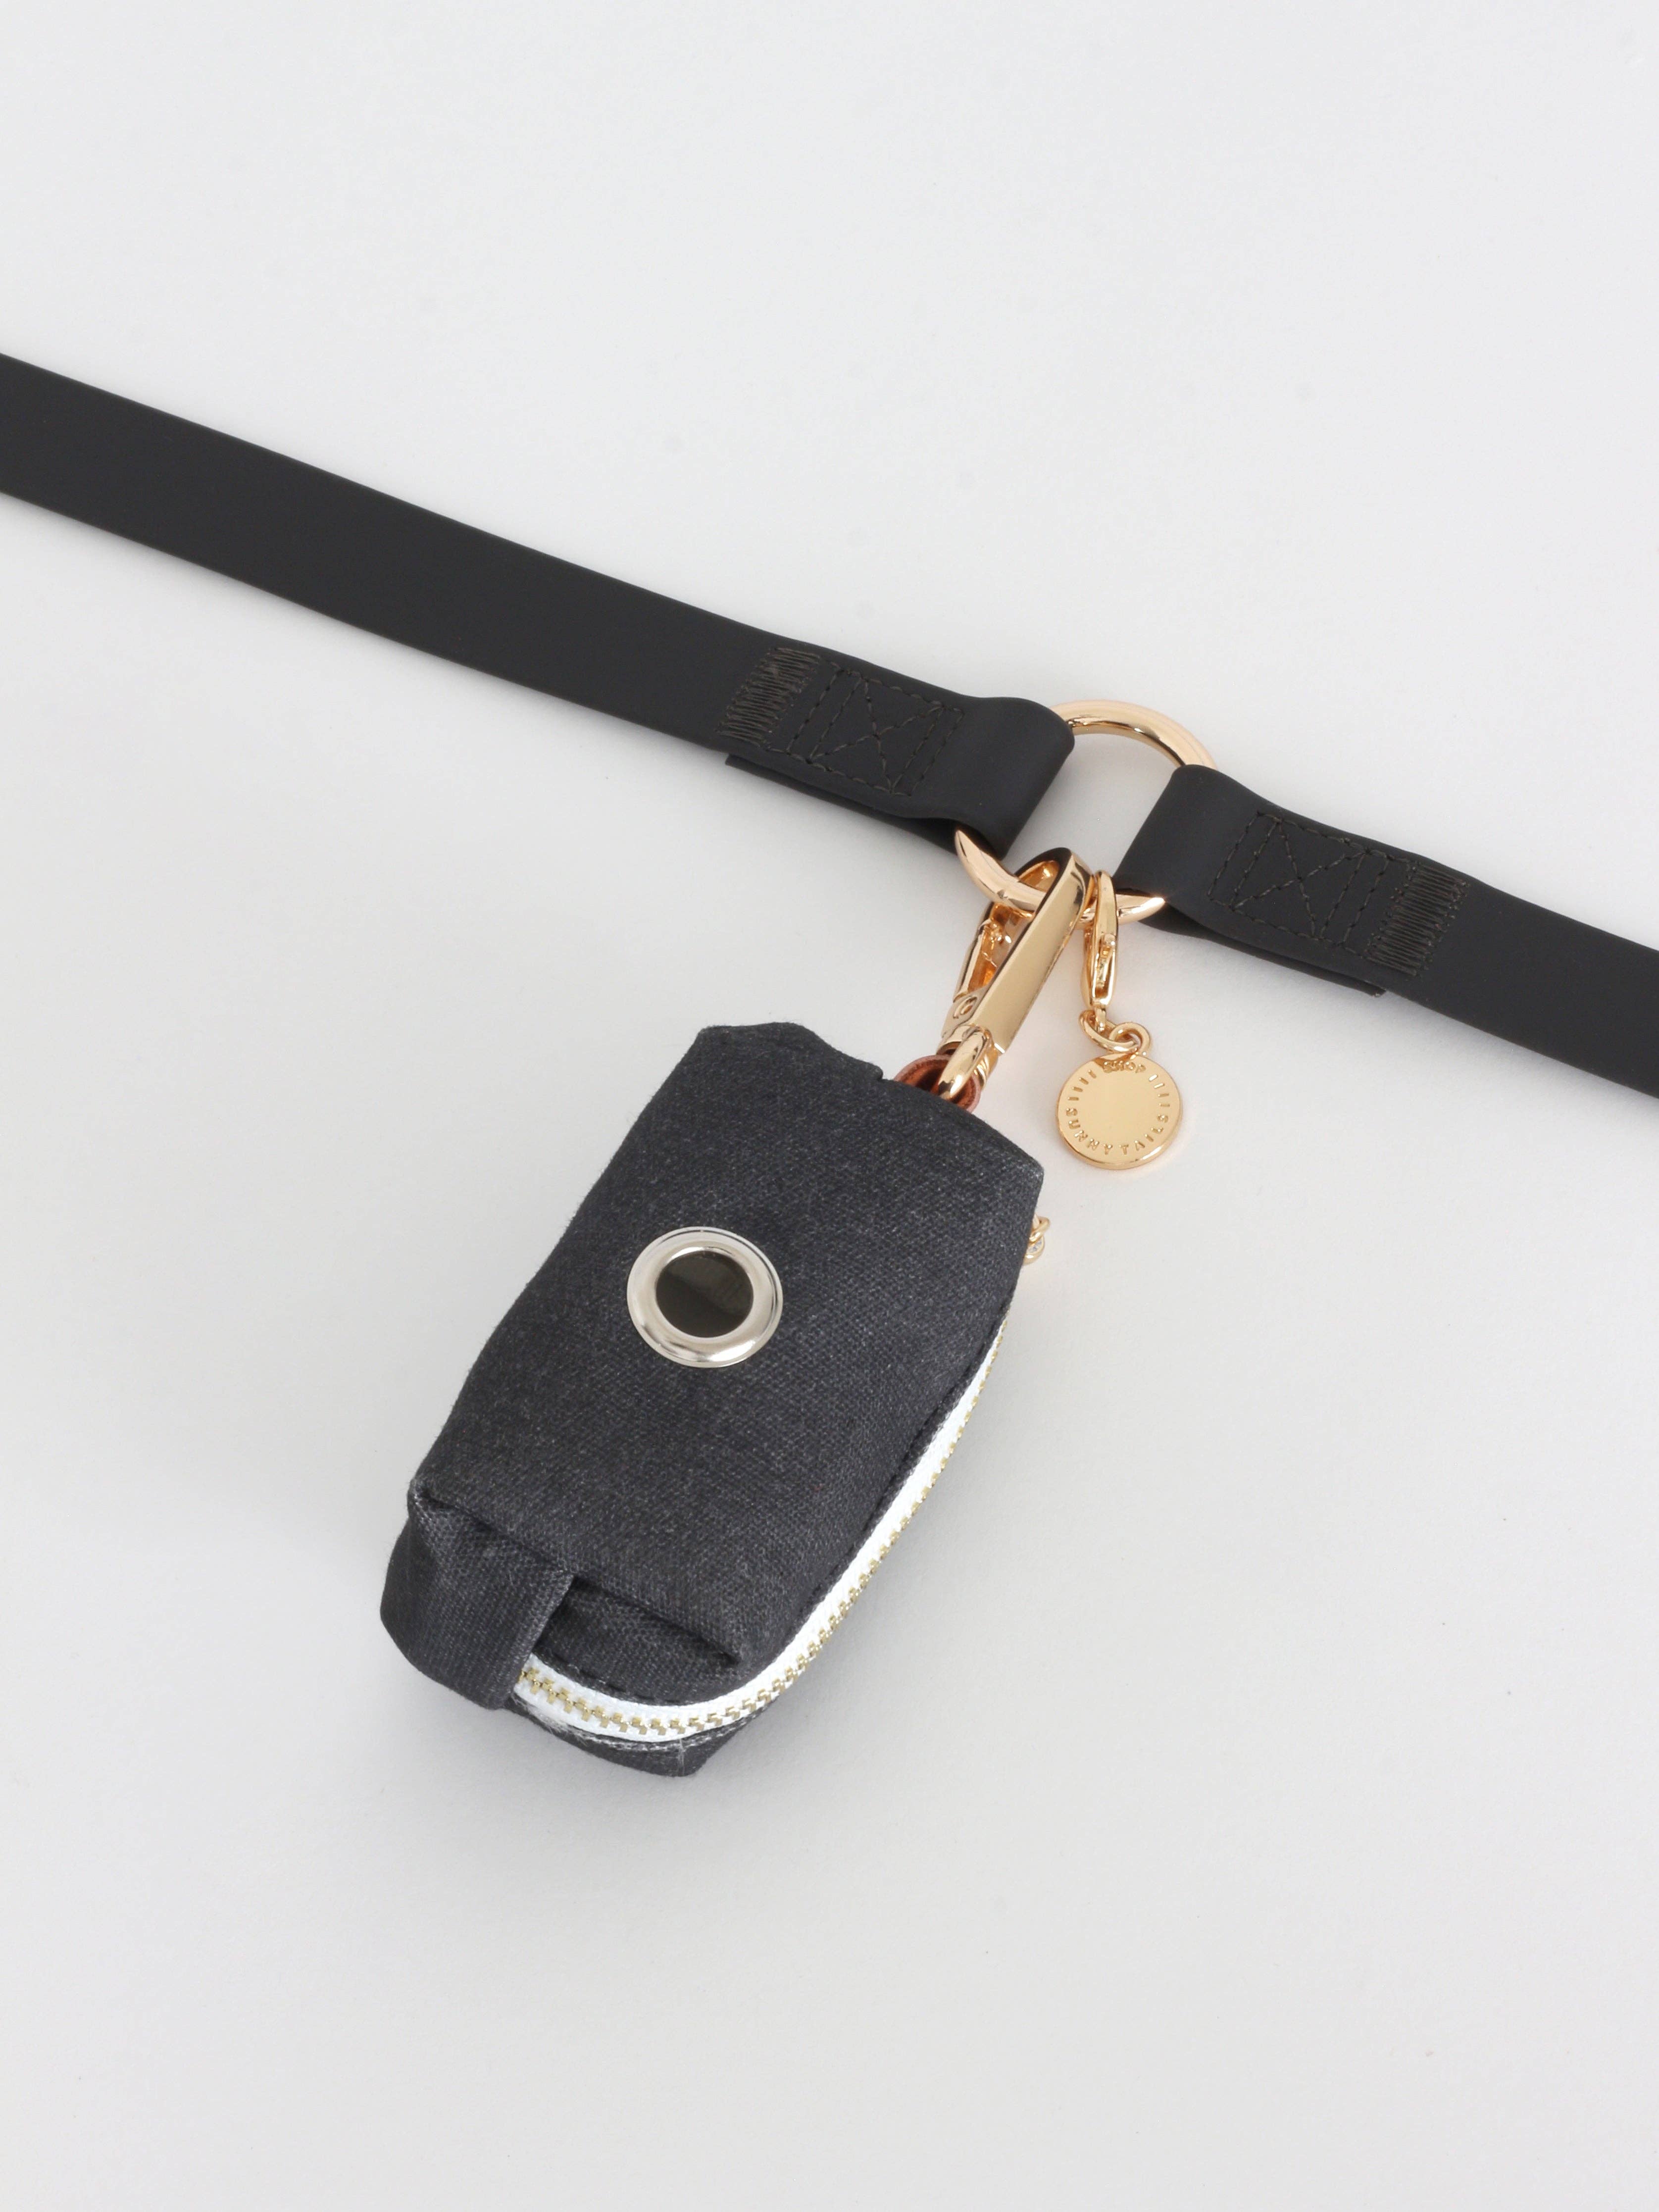 Ember Black 4-in-1 Convertible Hands Free Cloud Dog Leash